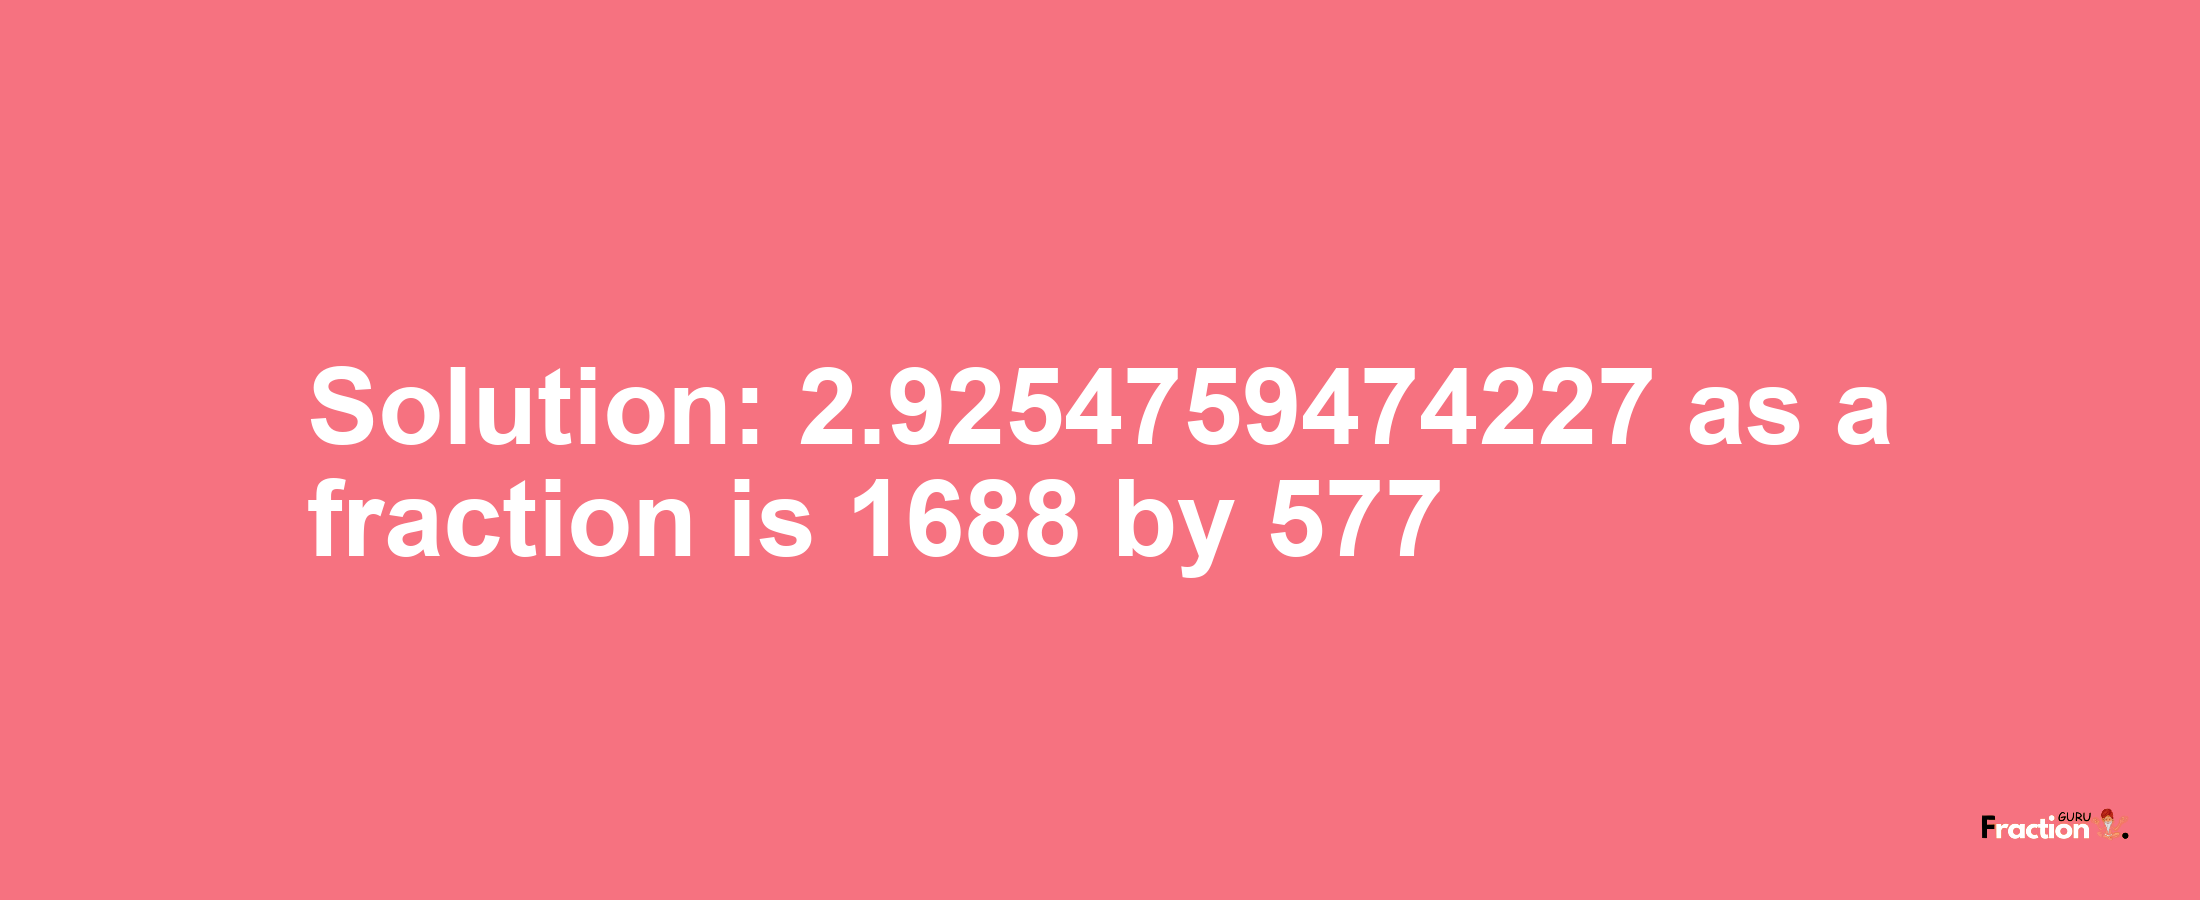 Solution:2.9254759474227 as a fraction is 1688/577